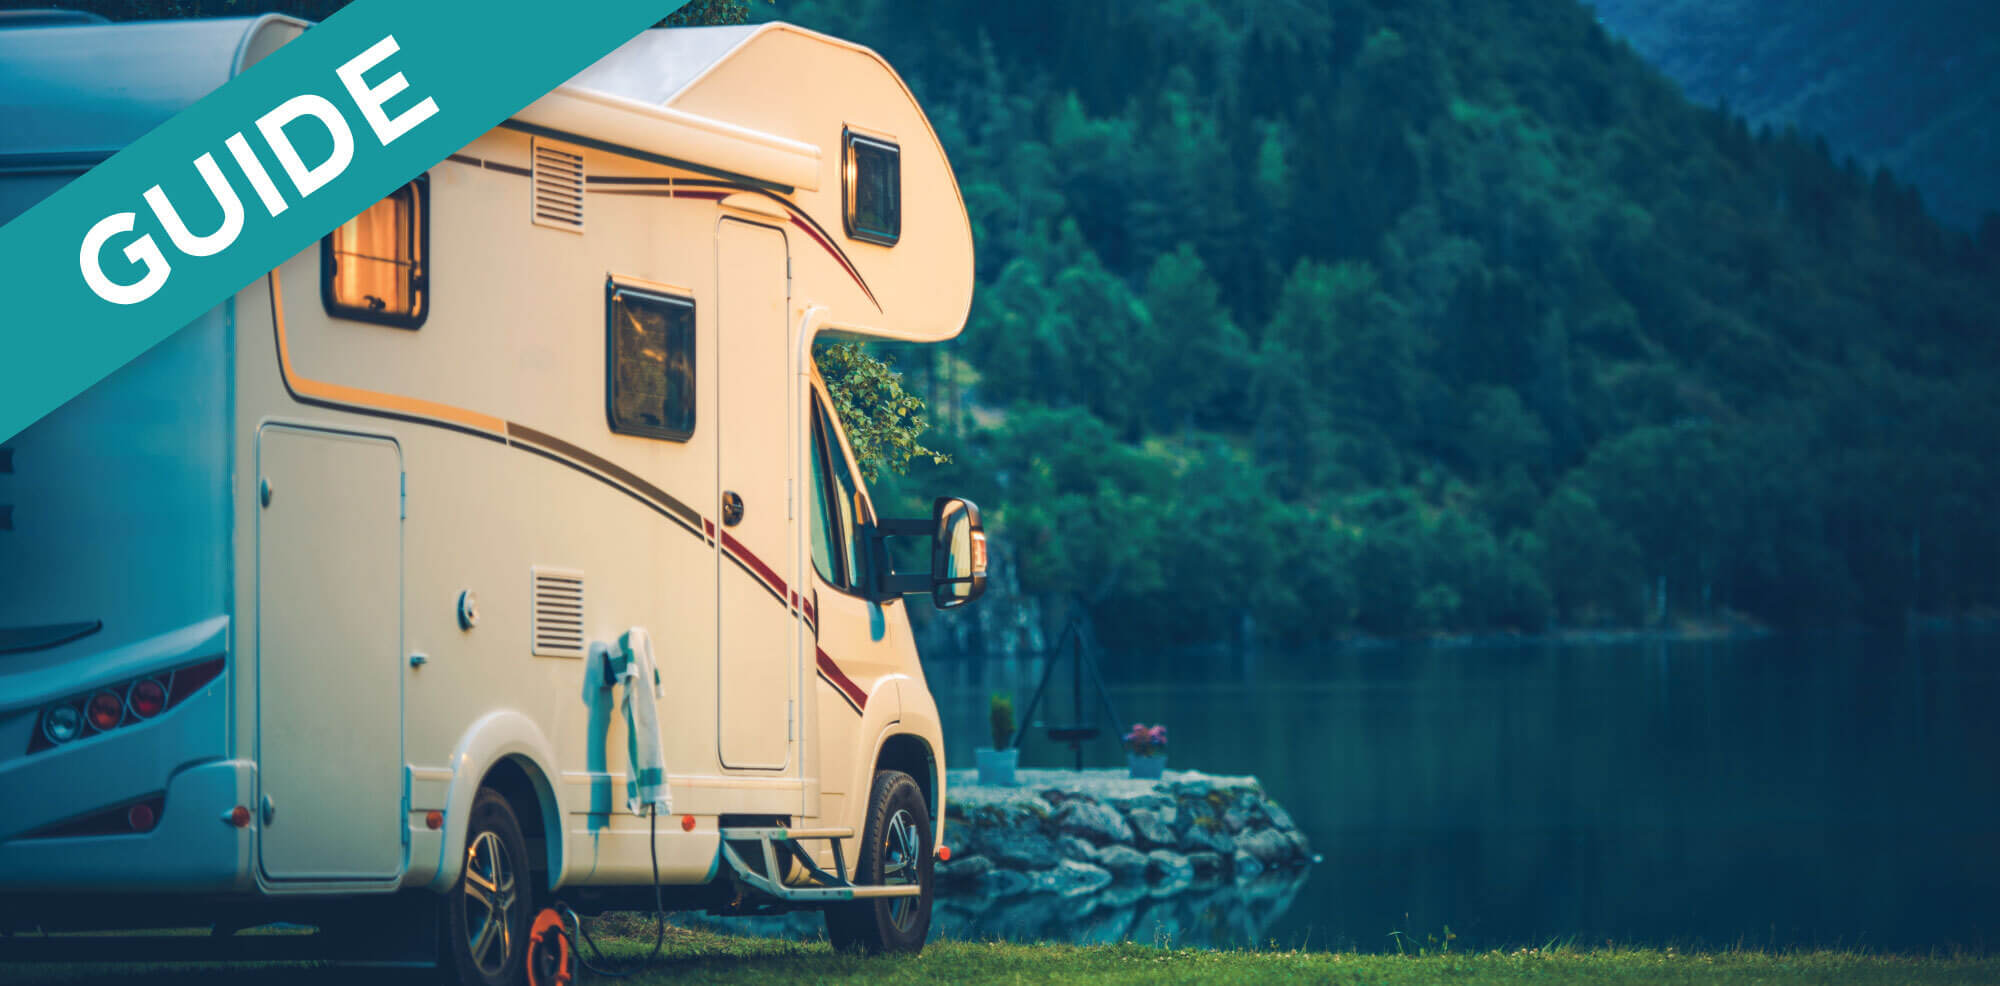 How to Use the water systems in your RV Rental. Rv Travel Like a pro!